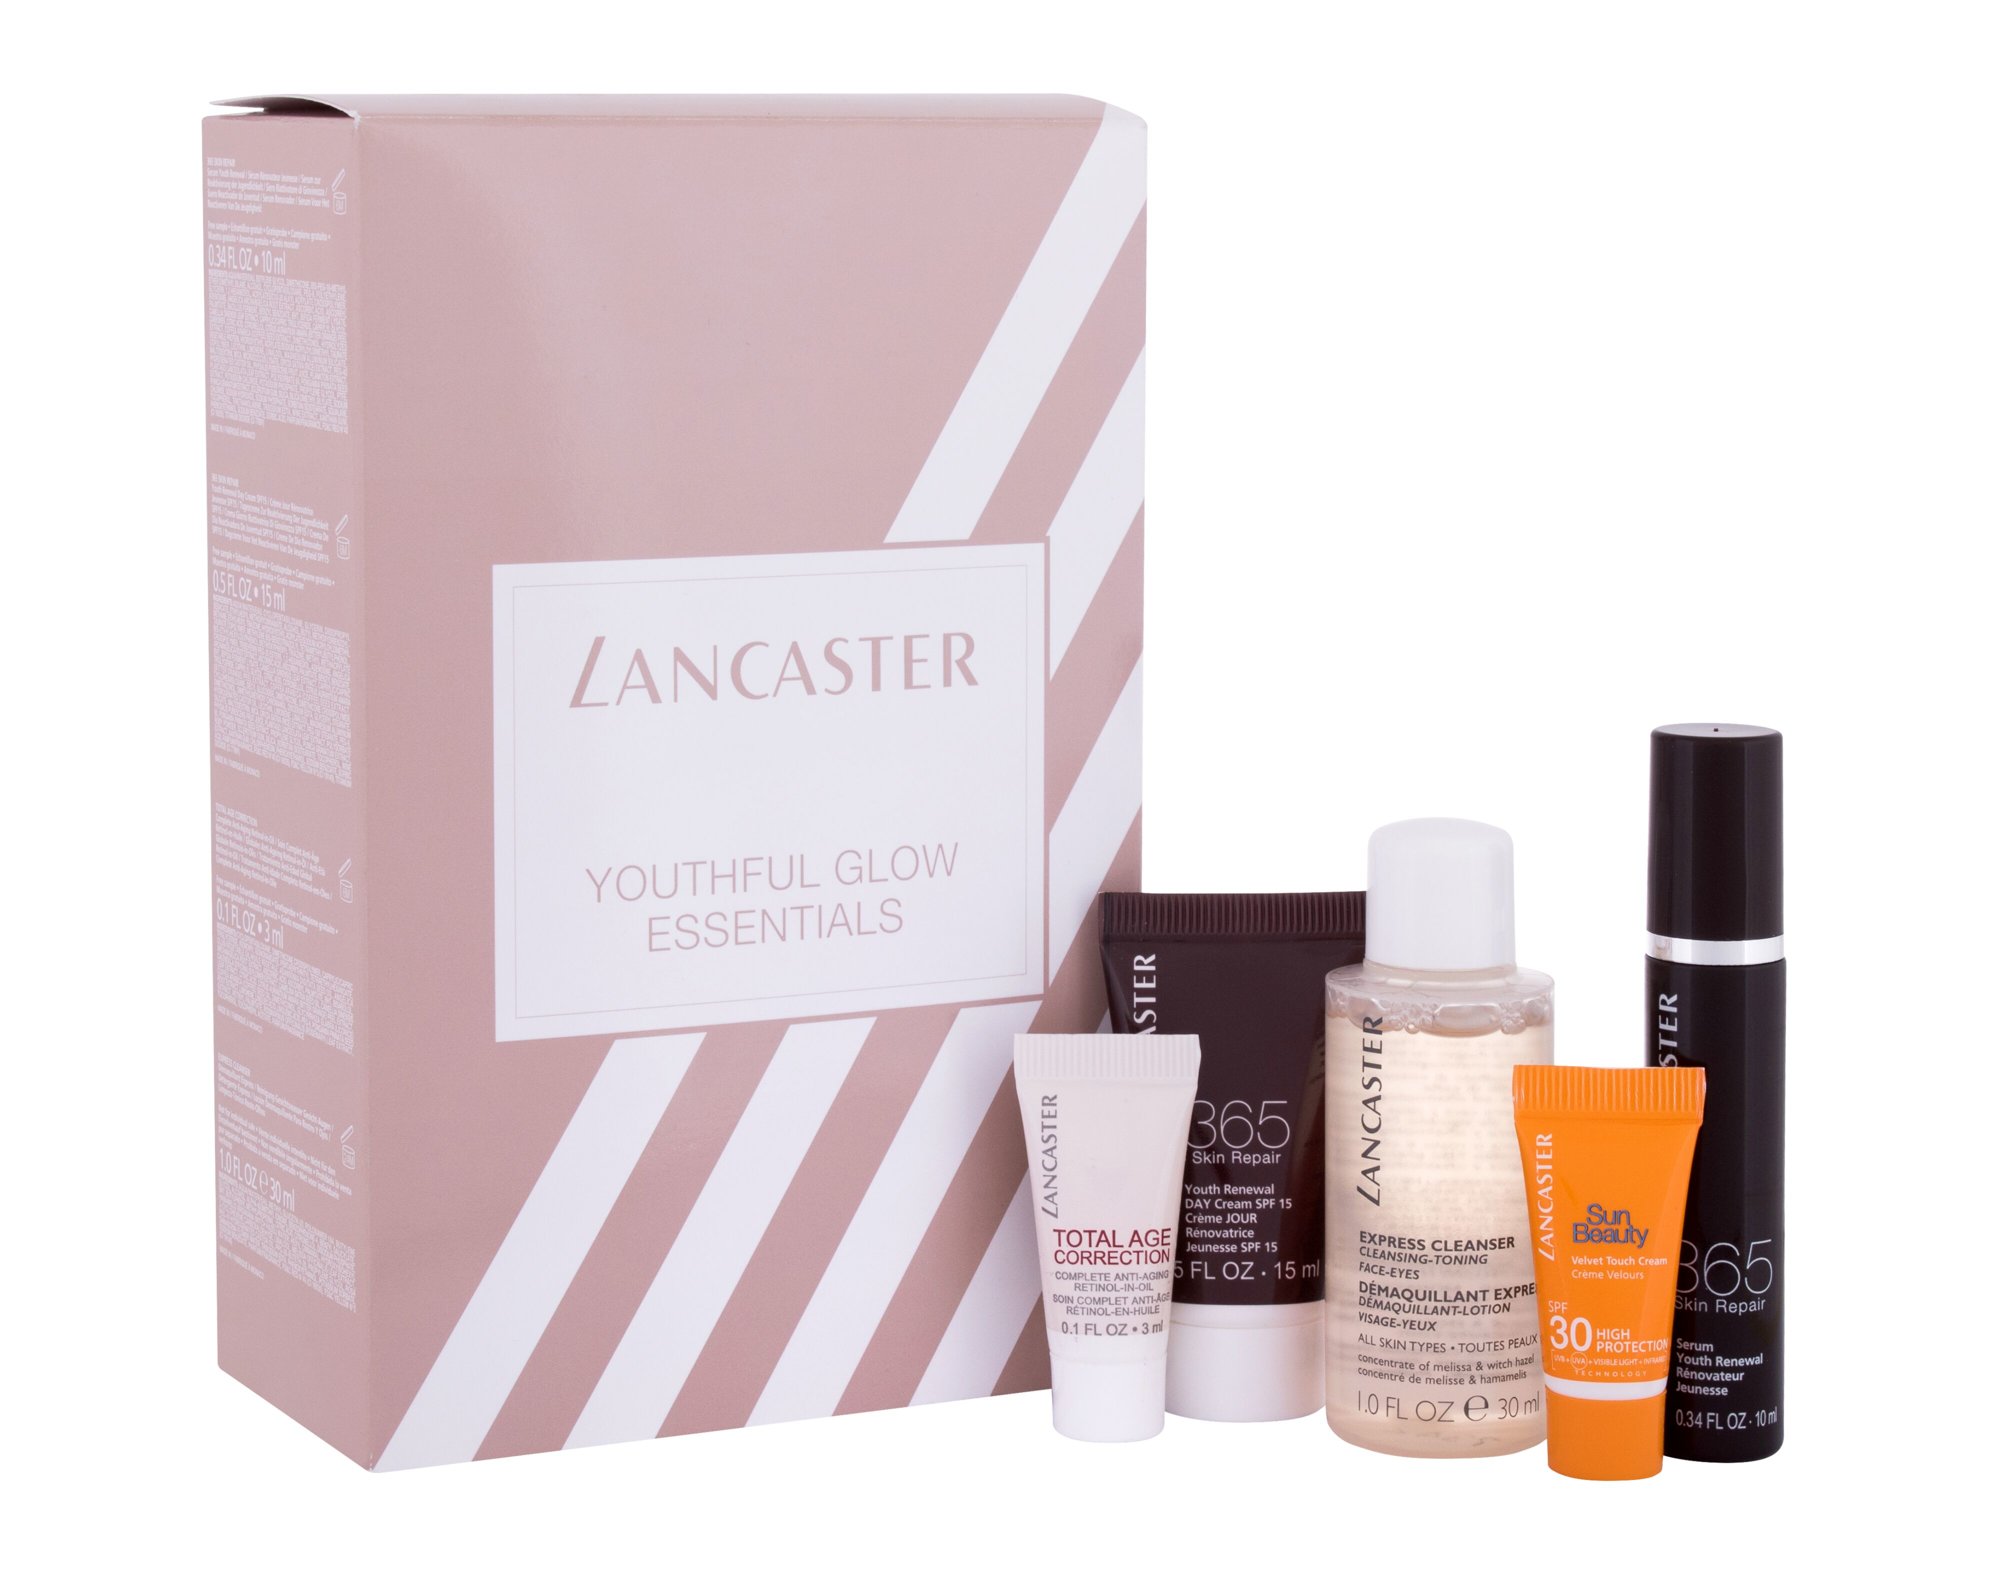 Lancaster Youthful Glow Essentials